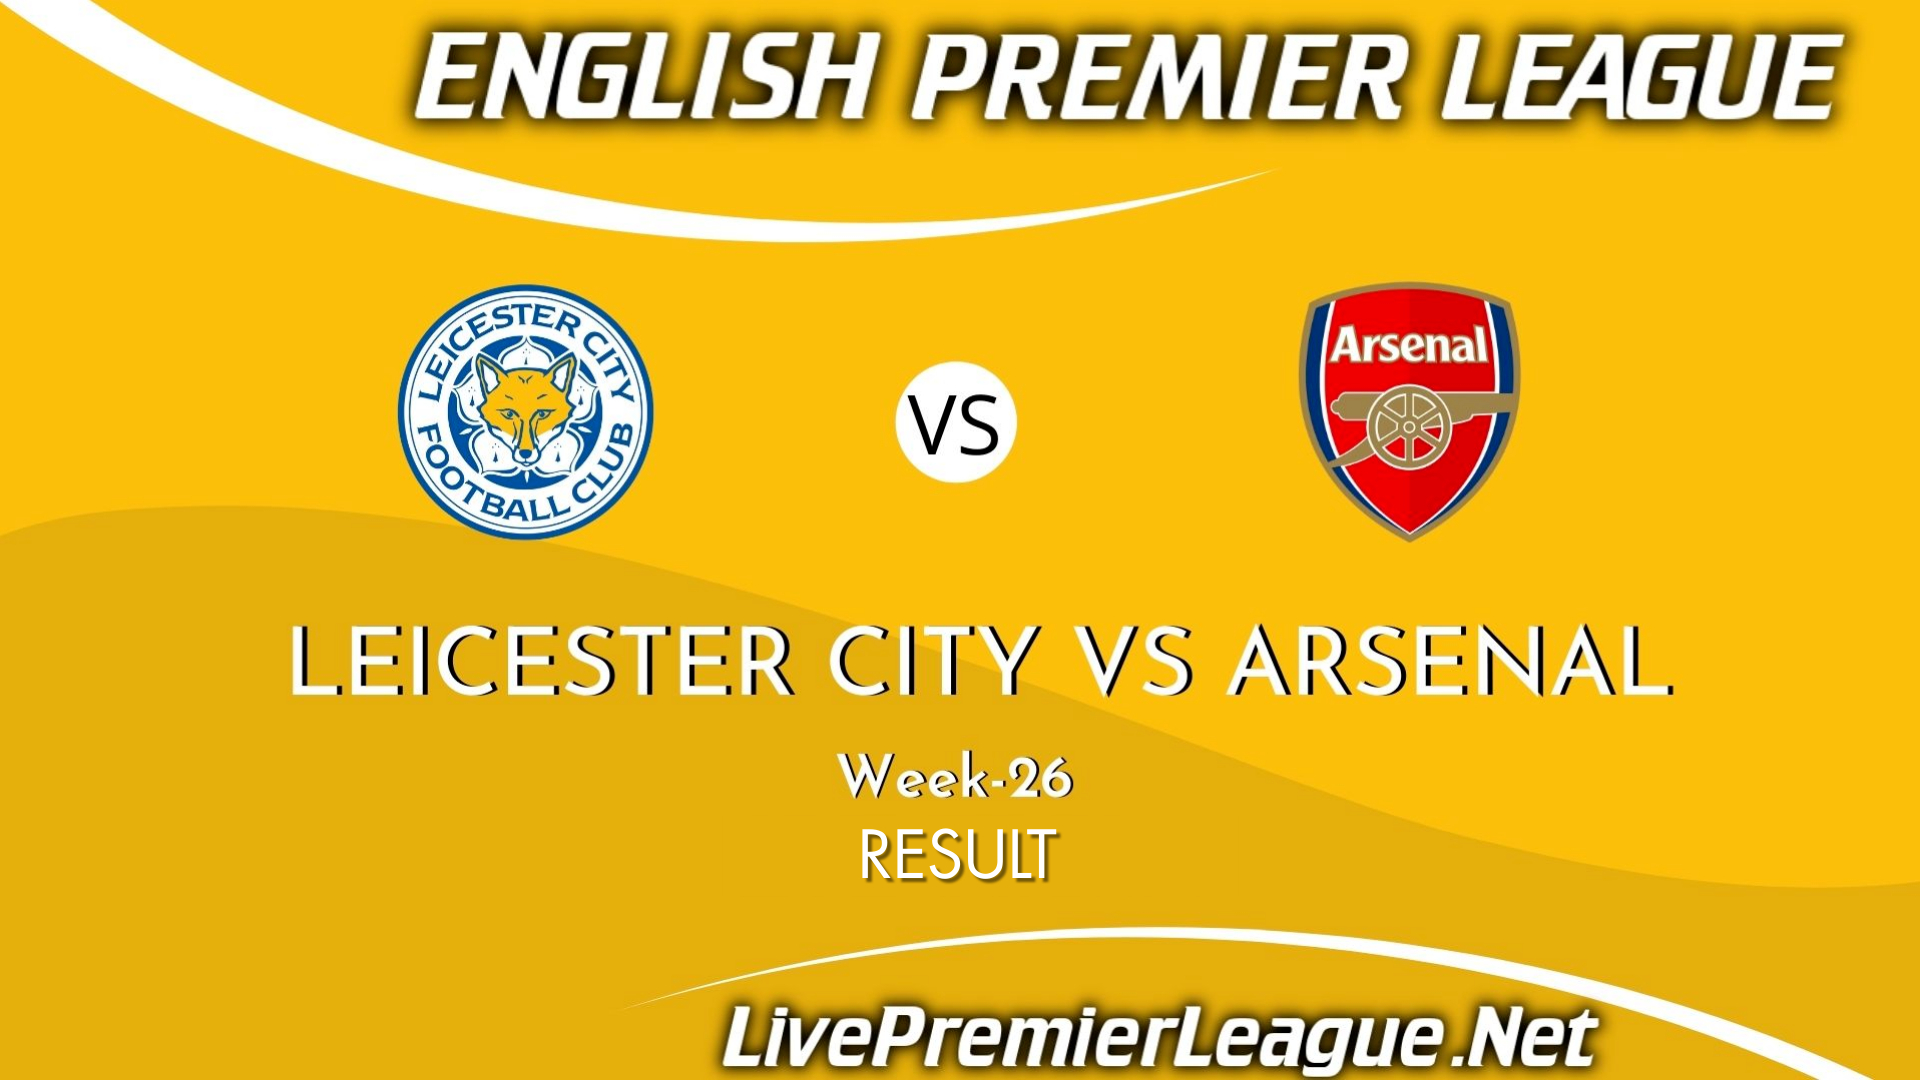 Leicester City Vs Arsenal | Result 2021 EPL Week 26